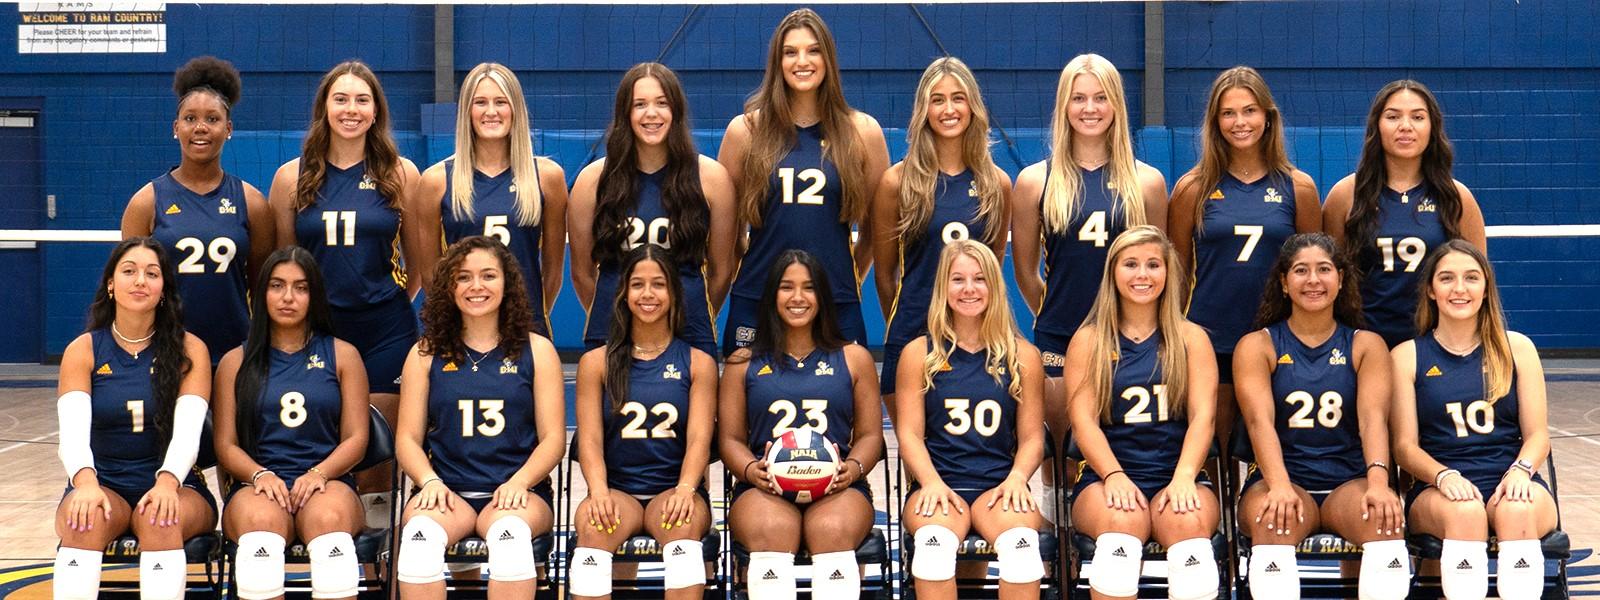 The CIU volleyball team ended the season with a record of 28-1.